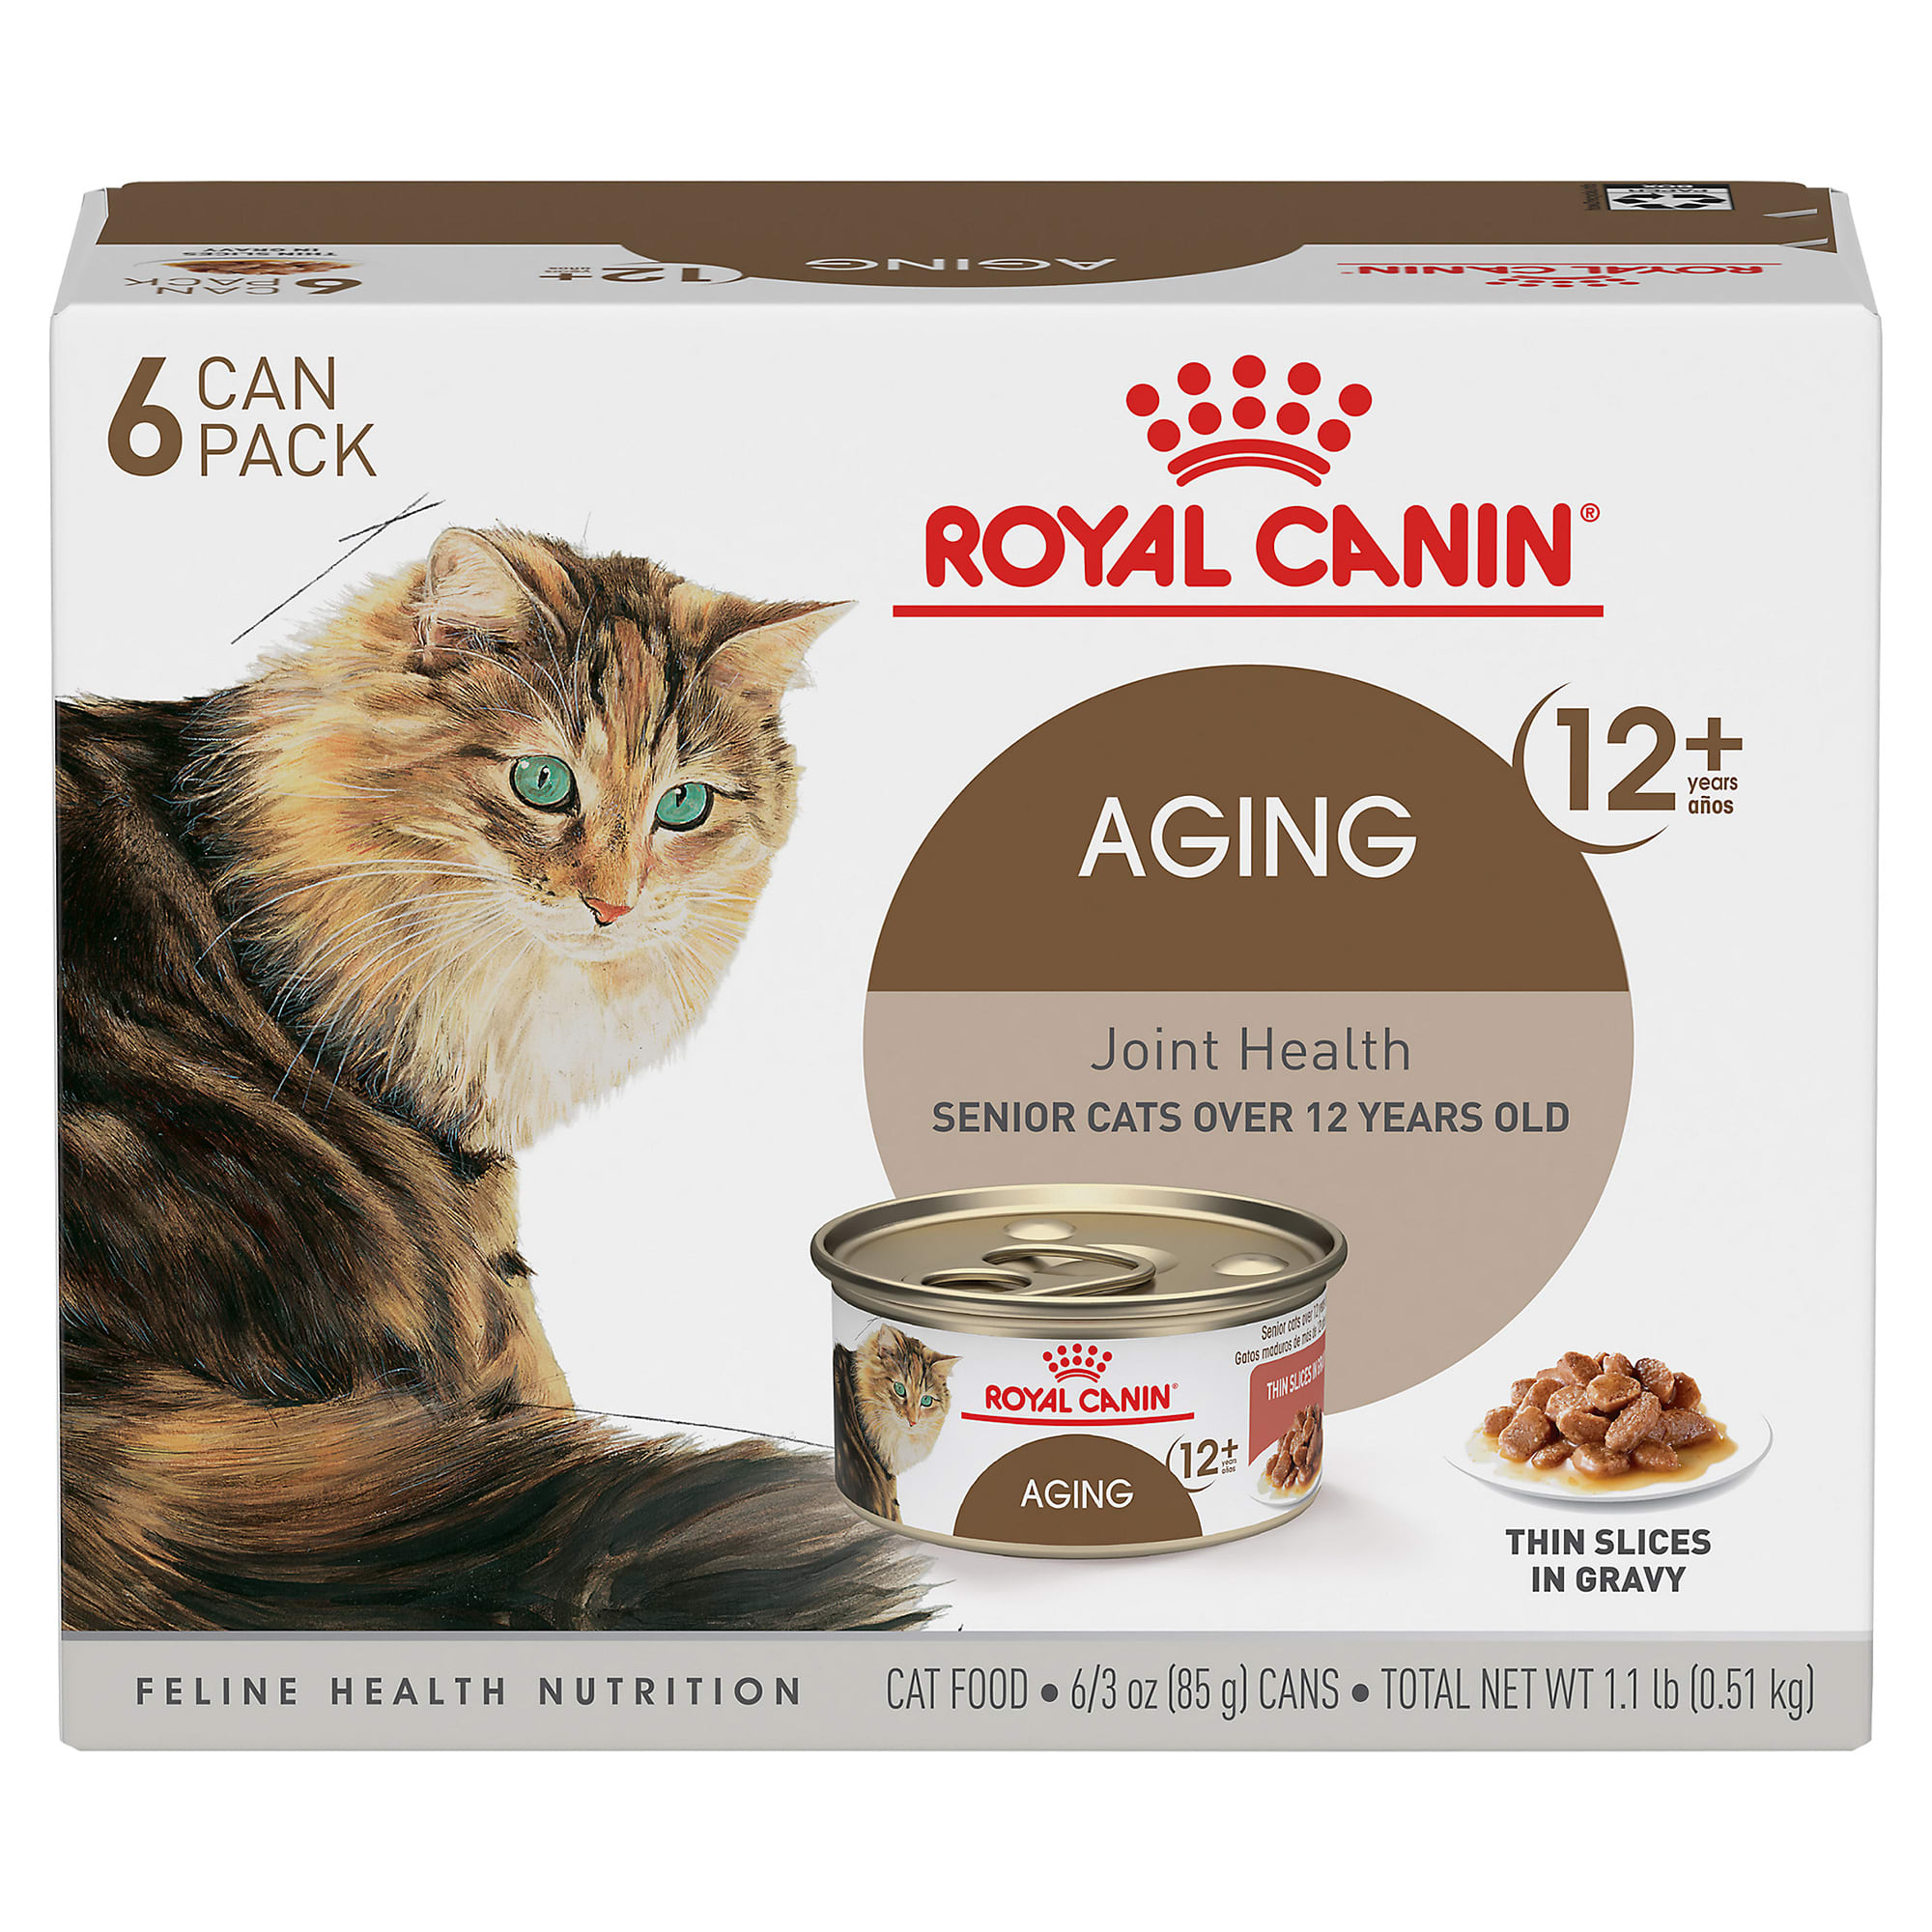 Royal Canin Aging 12+ Thin Slices in Gravy Variety Pack Wet Cat Food, 3